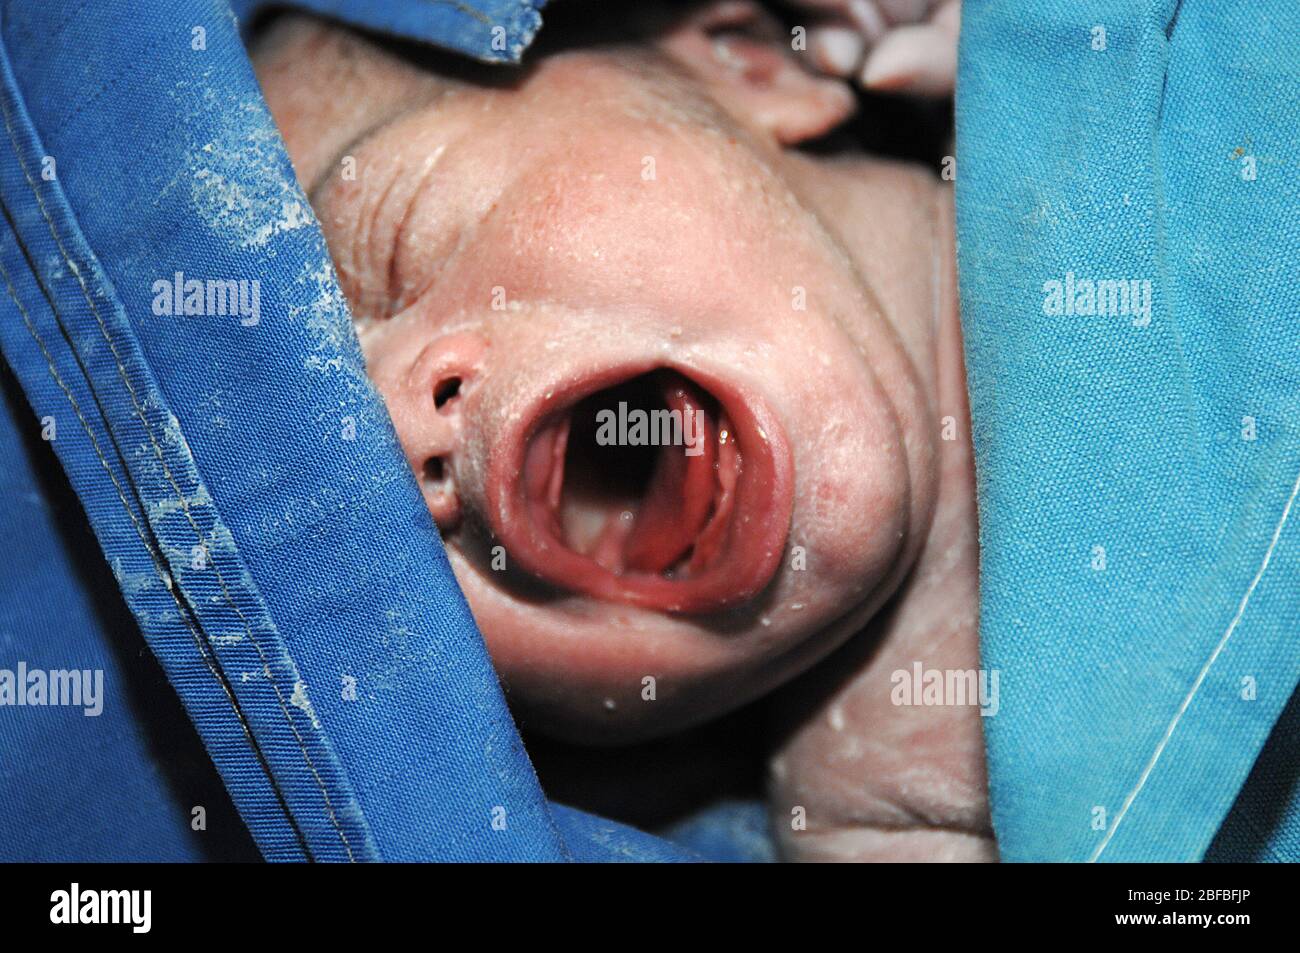 Close up of face of a new born baby, soon after birth. Stock Photo